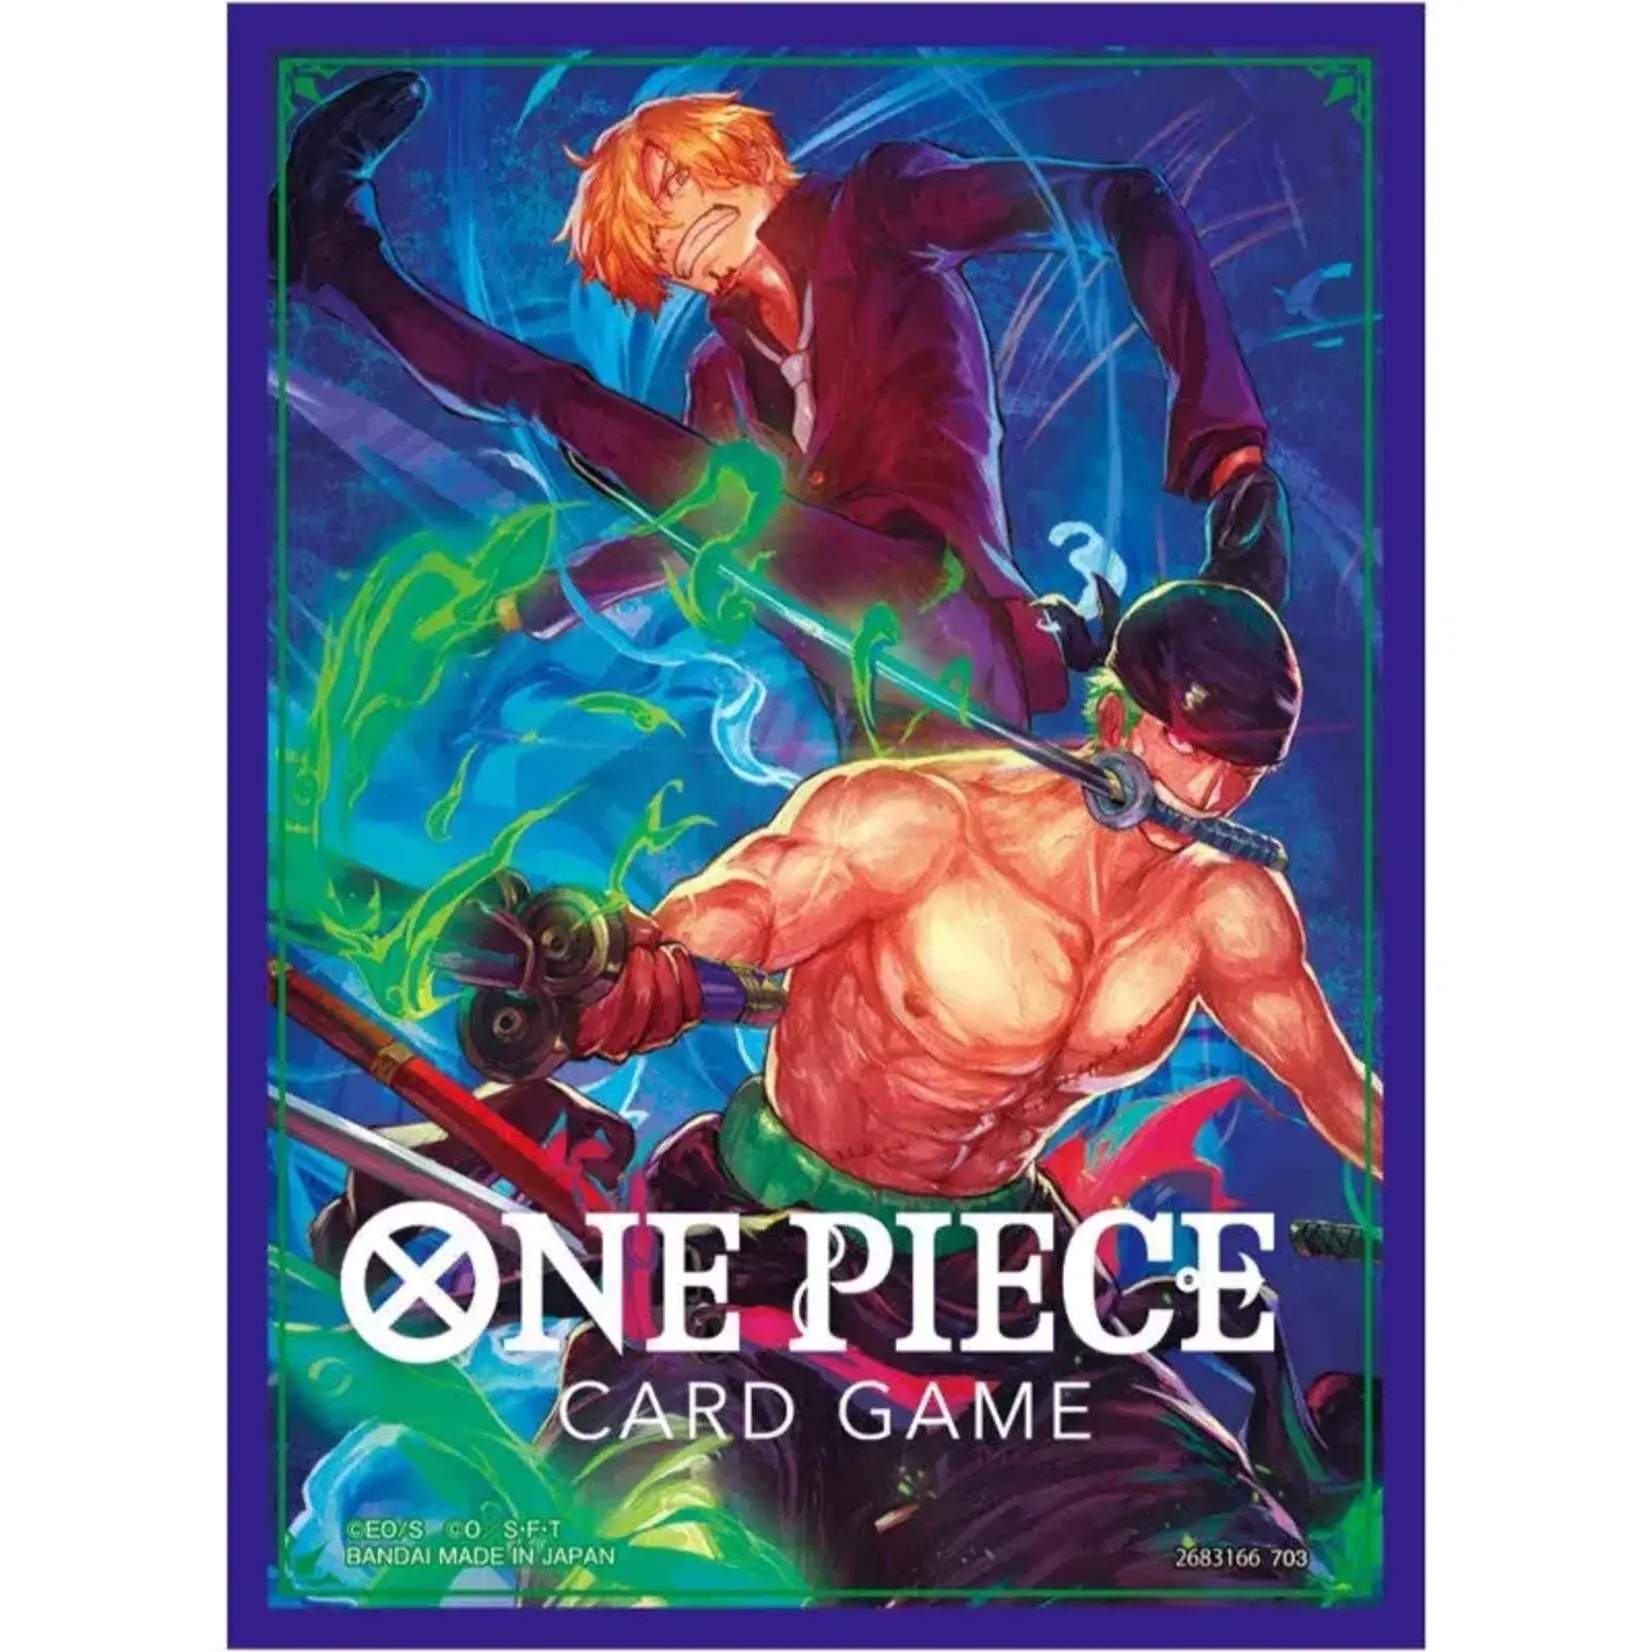 One Piece Card Game Official Card  Sleeves 5 - Zoro & Sanji